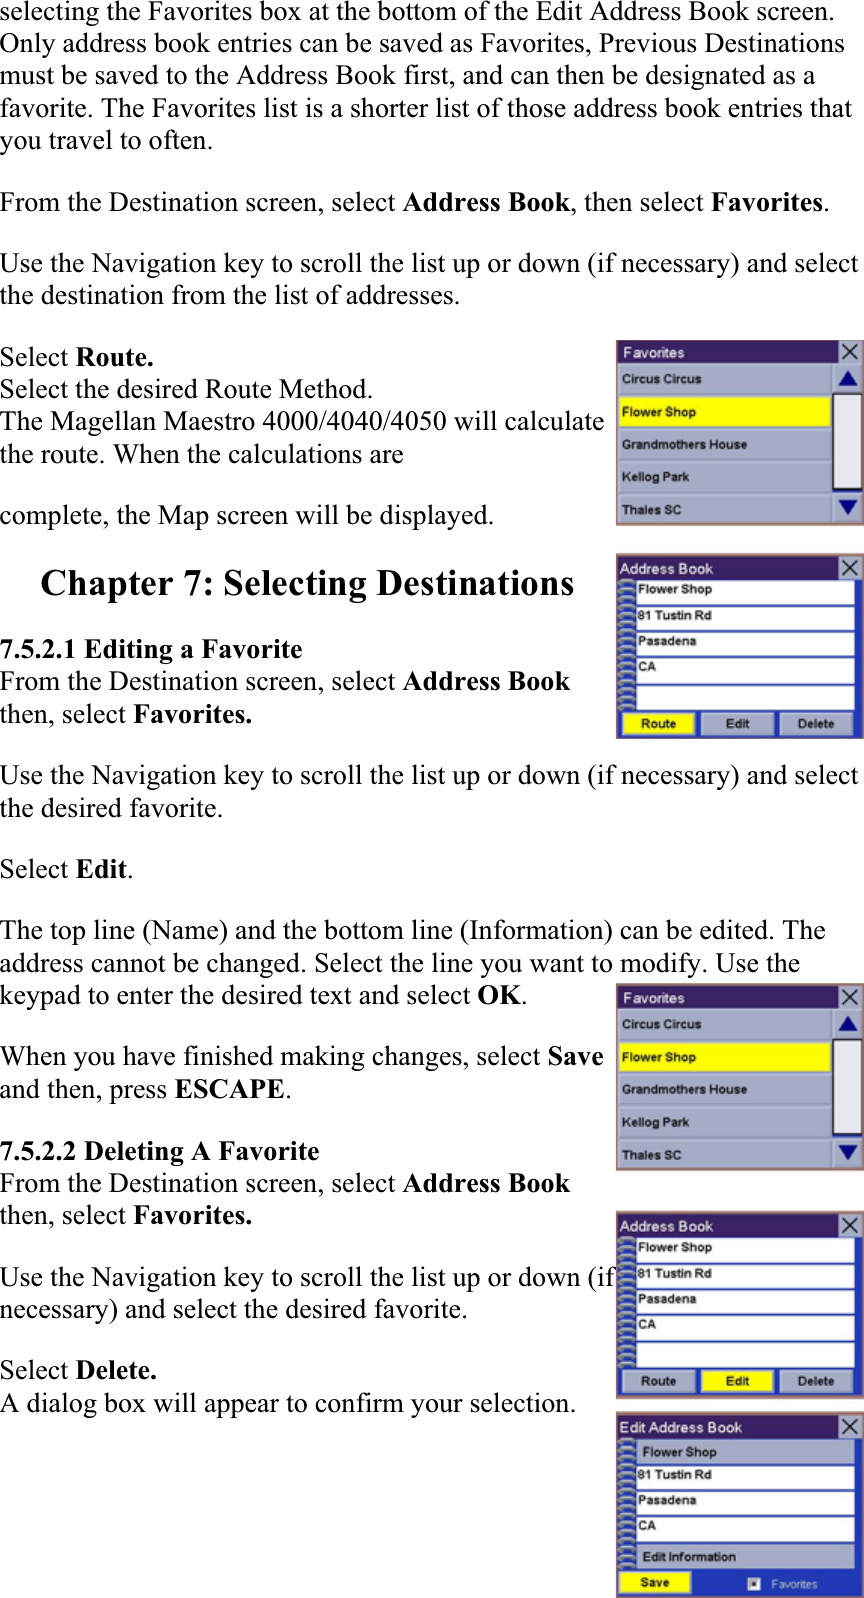 selecting the Favorites box at the bottom of the Edit Address Book screen. Only address book entries can be saved as Favorites, Previous Destinations must be saved to the Address Book first, and can then be designated as a favorite. The Favorites list is a shorter list of those address book entries that you travel to often.  From the Destination screen, select Address Book, then select Favorites.Use the Navigation key to scroll the list up or down (if necessary) and select the destination from the list of addresses.  Select Route.Select the desired Route Method. The Magellan Maestro 4000/4040/4050 will calculate the route. When the calculations are complete, the Map screen will be displayed.  Chapter 7: Selecting Destinations 7.5.2.1 Editing a Favorite From the Destination screen, select Address Book then, select Favorites. Use the Navigation key to scroll the list up or down (if necessary) and select the desired favorite.  Select Edit.The top line (Name) and the bottom line (Information) can be edited. The address cannot be changed. Select the line you want to modify. Use the keypad to enter the desired text and select OK.When you have finished making changes, select Save and then, press ESCAPE.7.5.2.2 Deleting A Favorite From the Destination screen, select Address Bookthen, select Favorites. Use the Navigation key to scroll the list up or down (if necessary) and select the desired favorite.Select Delete.A dialog box will appear to confirm your selection. 